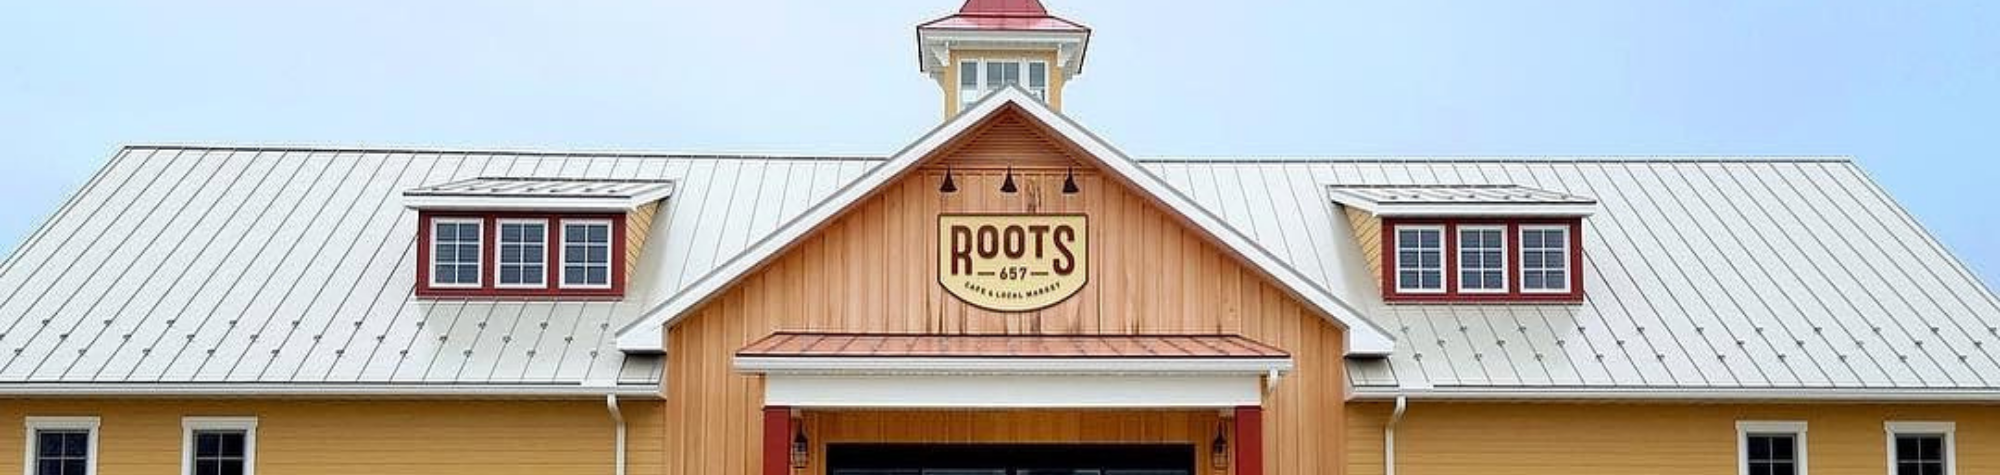 Owners of Leesburg’s Roots 657 plan restaurant, ghost kitchen in D.C.